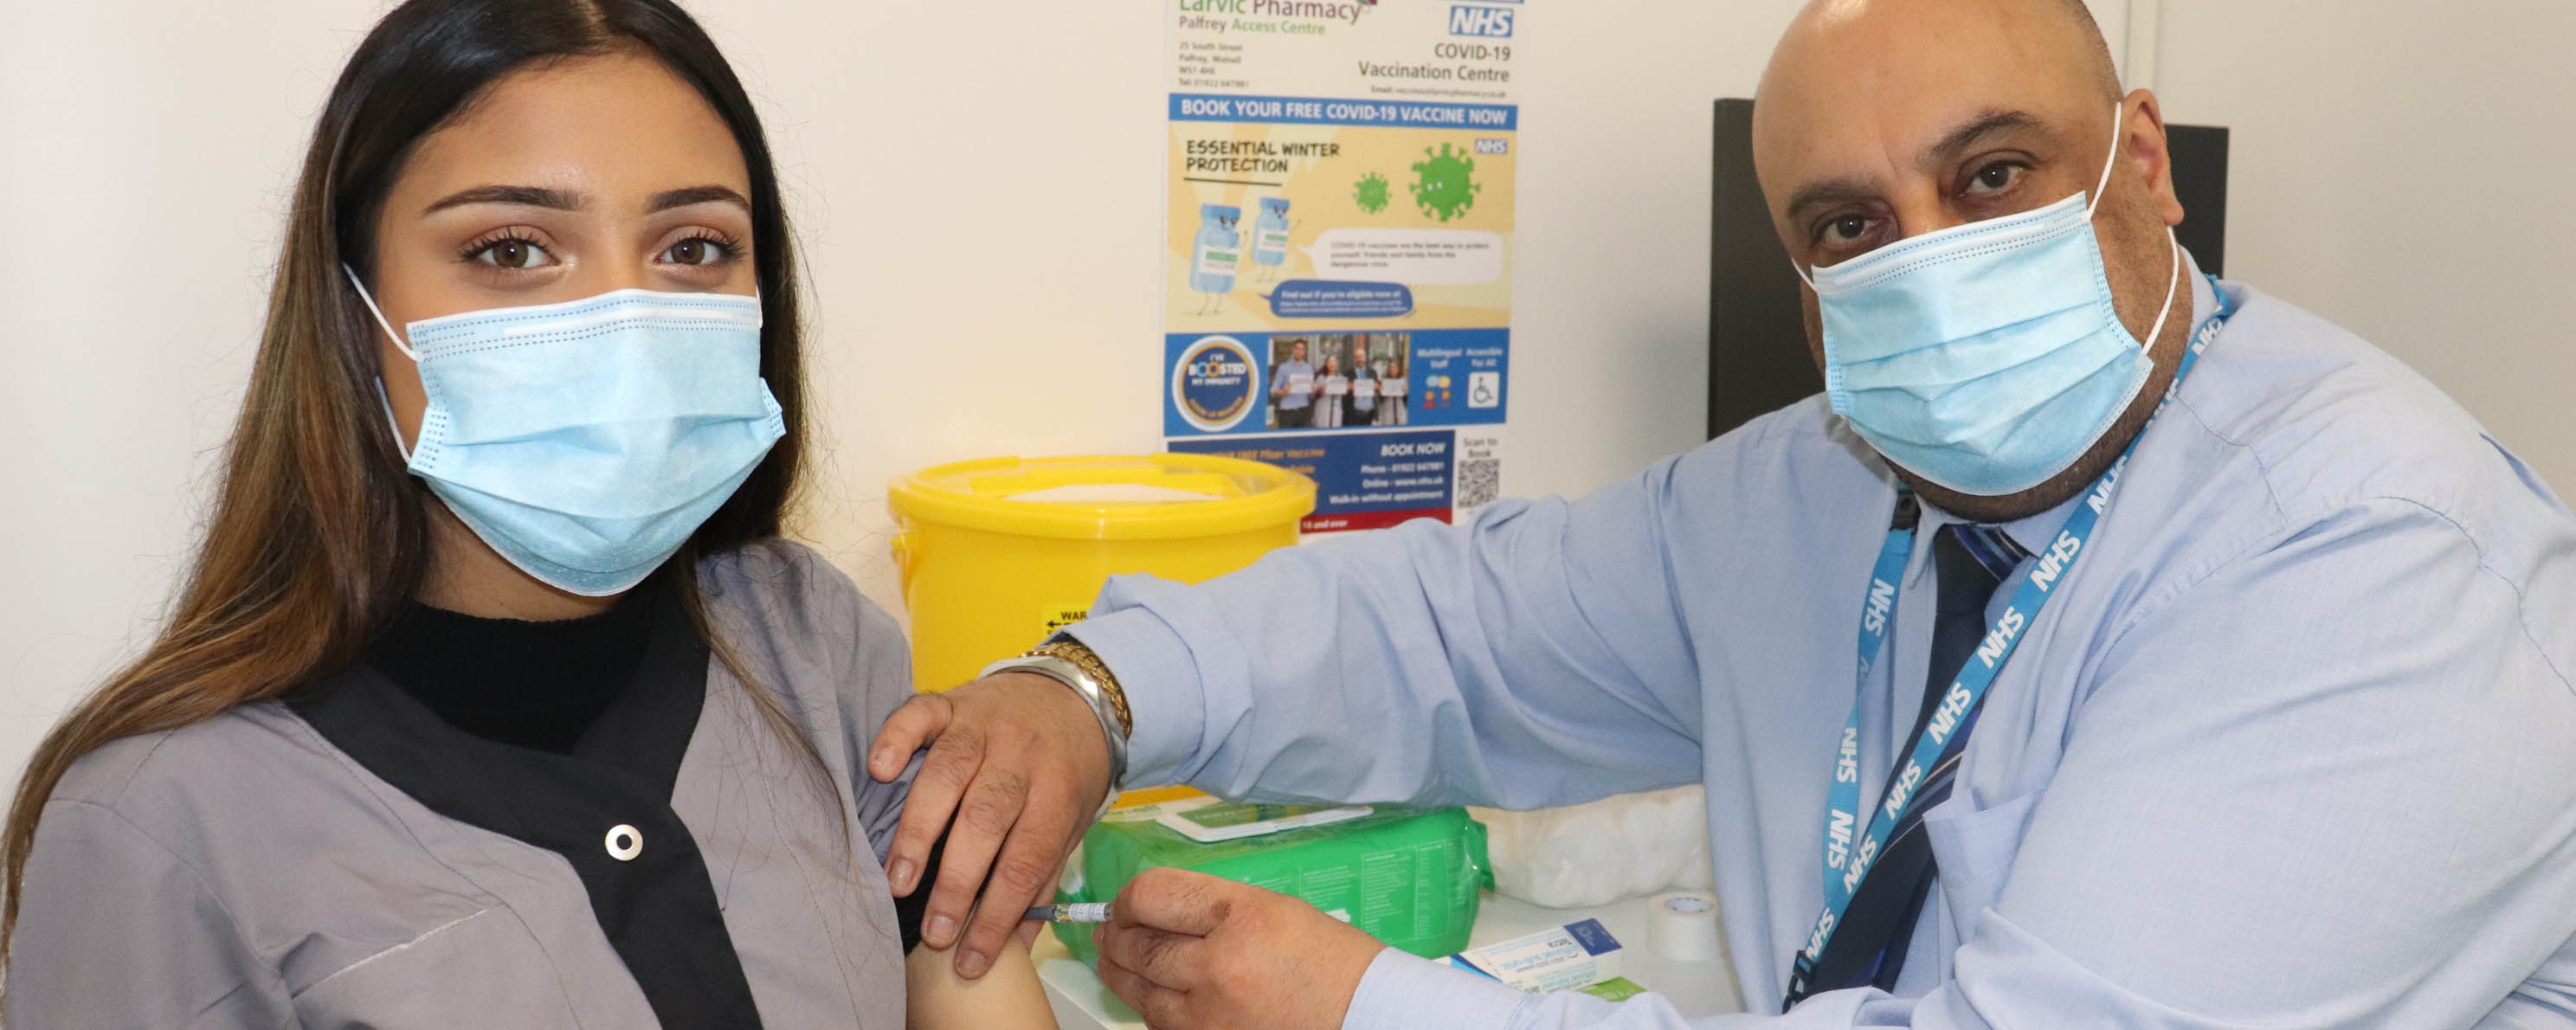 apprentice pharmacy assistant receiving vaccine from pharmacist facing